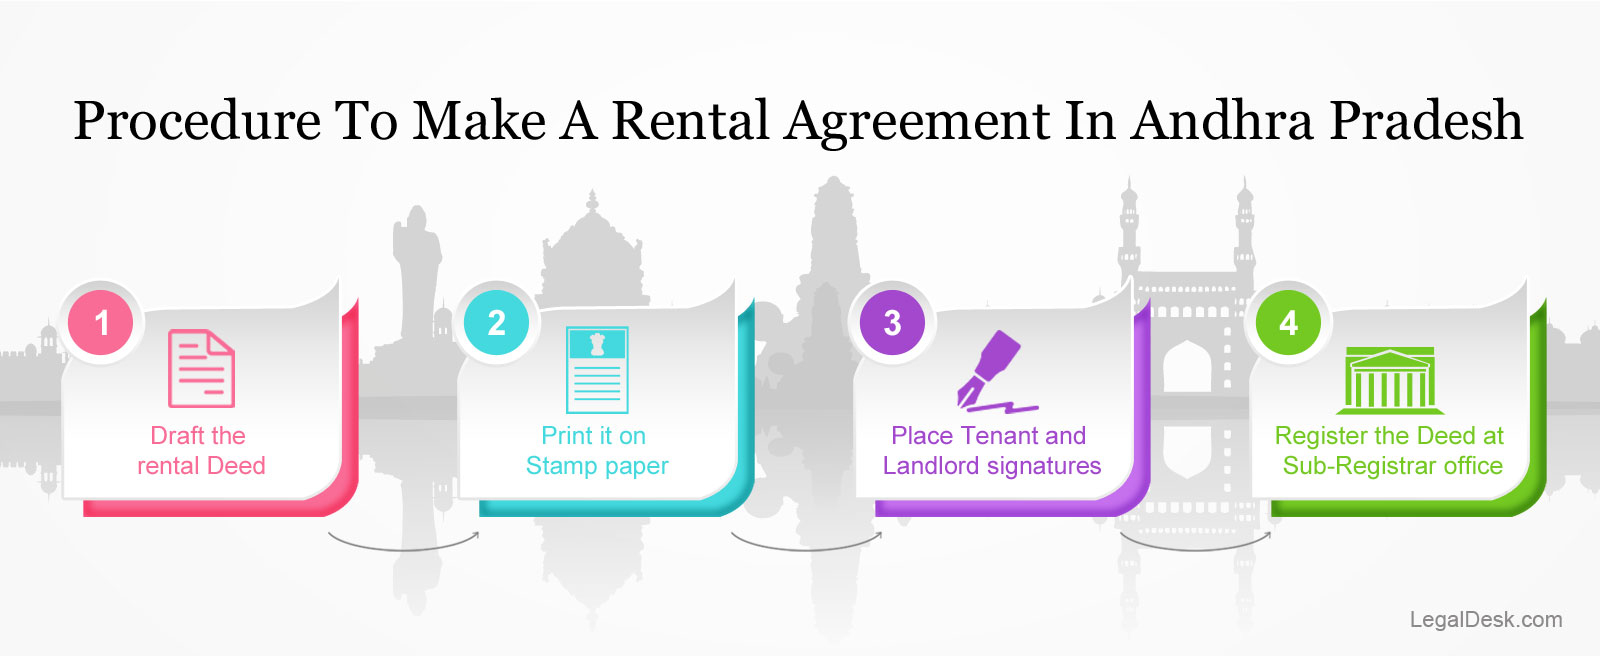 Rental Agreement Example How To Make A Rental Agreement In Hyderabad And Telangana